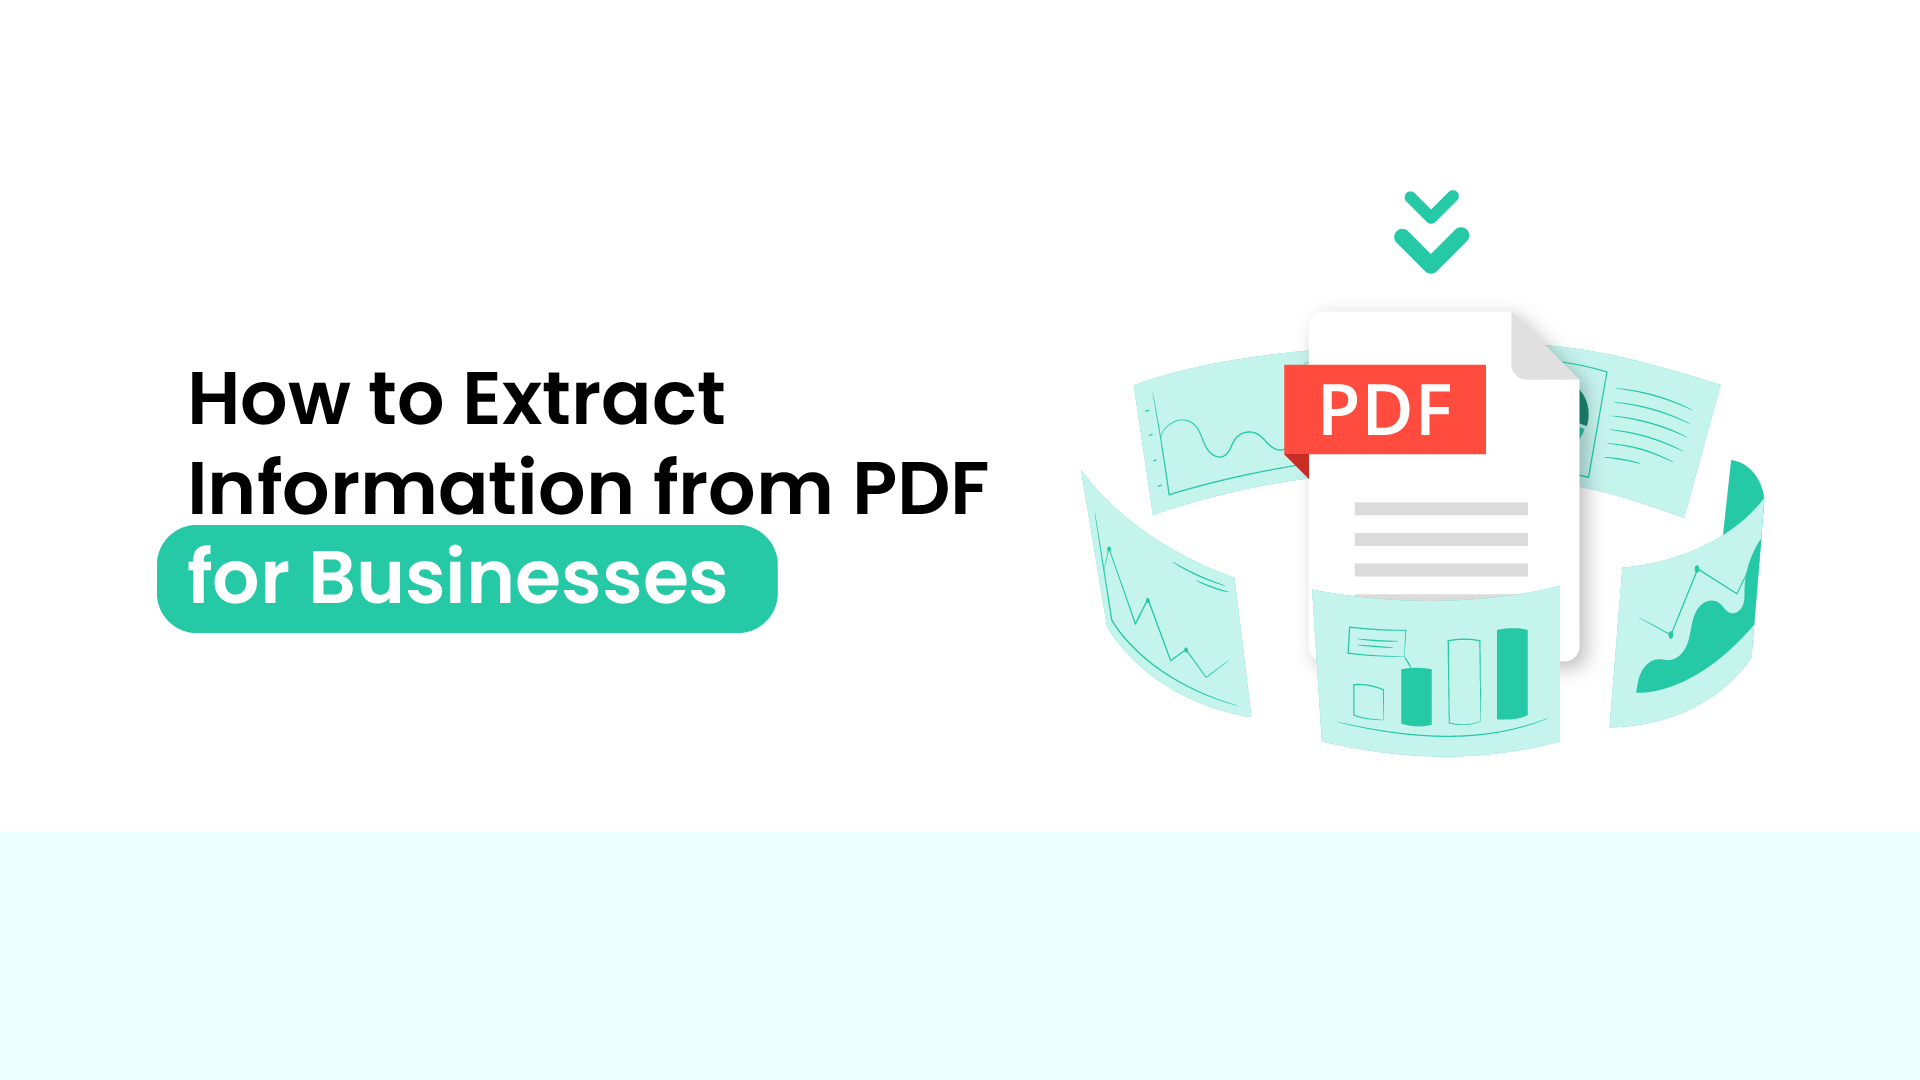 How to Extract Information from PDF for Businesses